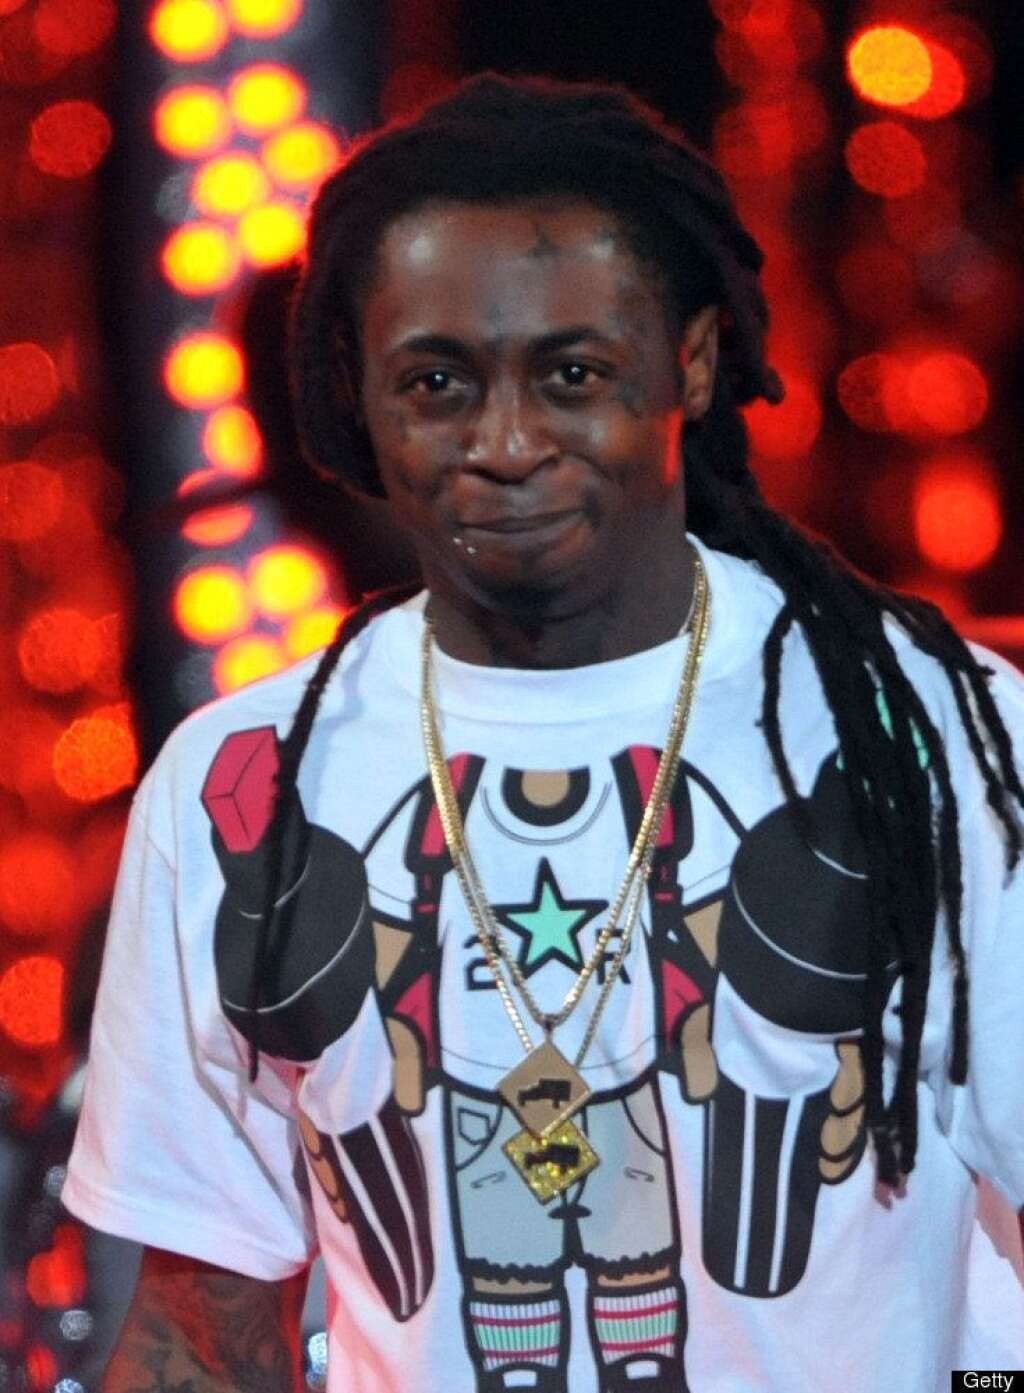 Dwayne "Lil Wayne" Carter - Lil Wayne had an IRS lien filed with Miami Dade County in late March 2011. The lien <a href="http://www.mtv.com/news/articles/1661259/lil-wayne-tax-lien-irs.jhtml" target="_hplink">noted</a> that Lil Wayne had unpaid income taxes amounting to $3,351,078 for 2008 and $2,258,956 for 2009.